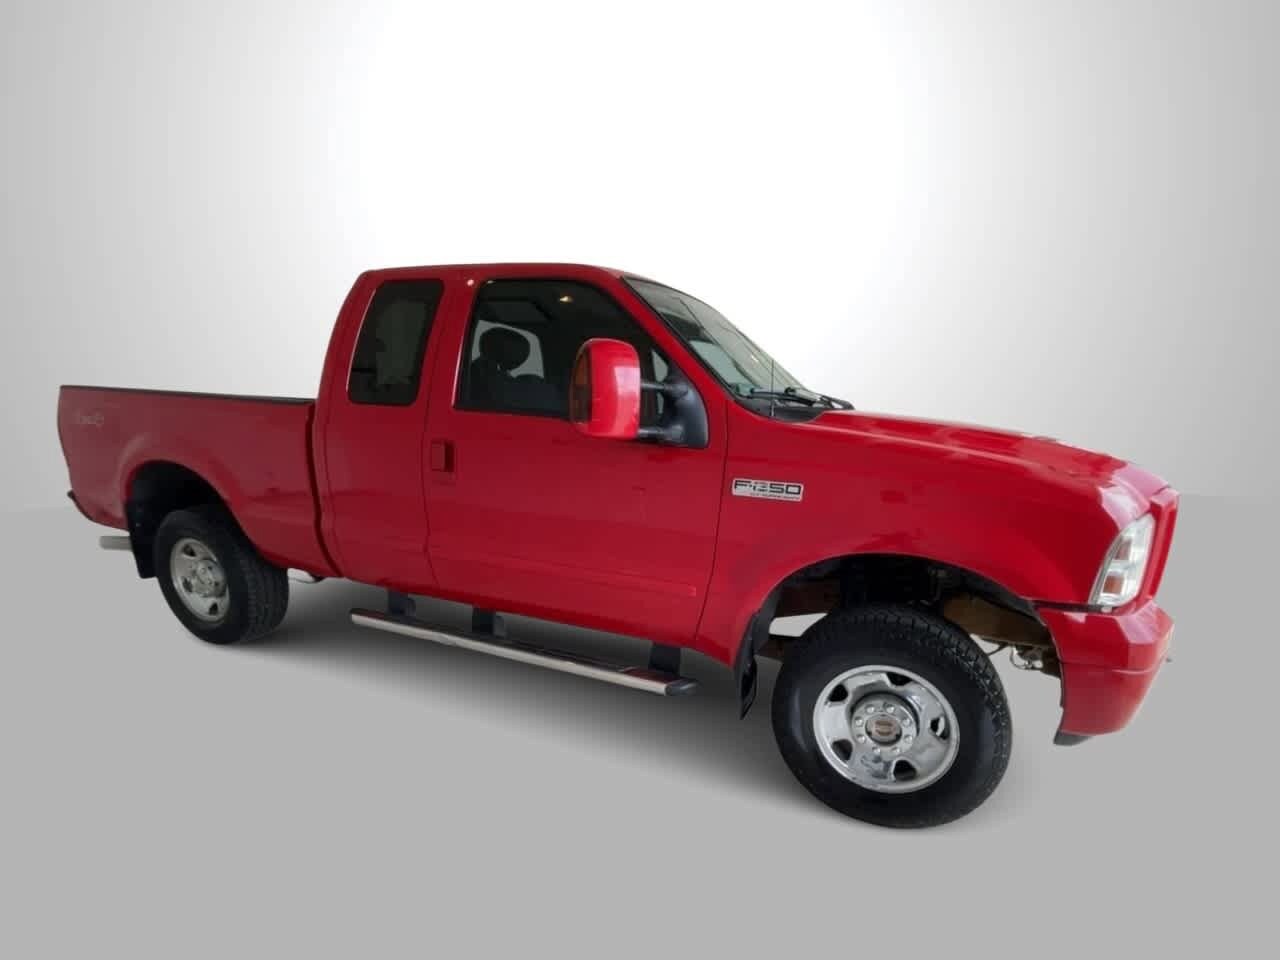 Used 2006 Ford F-250 Super Duty XLT with VIN 1FTSX21506EB68646 for sale in Billings, MT